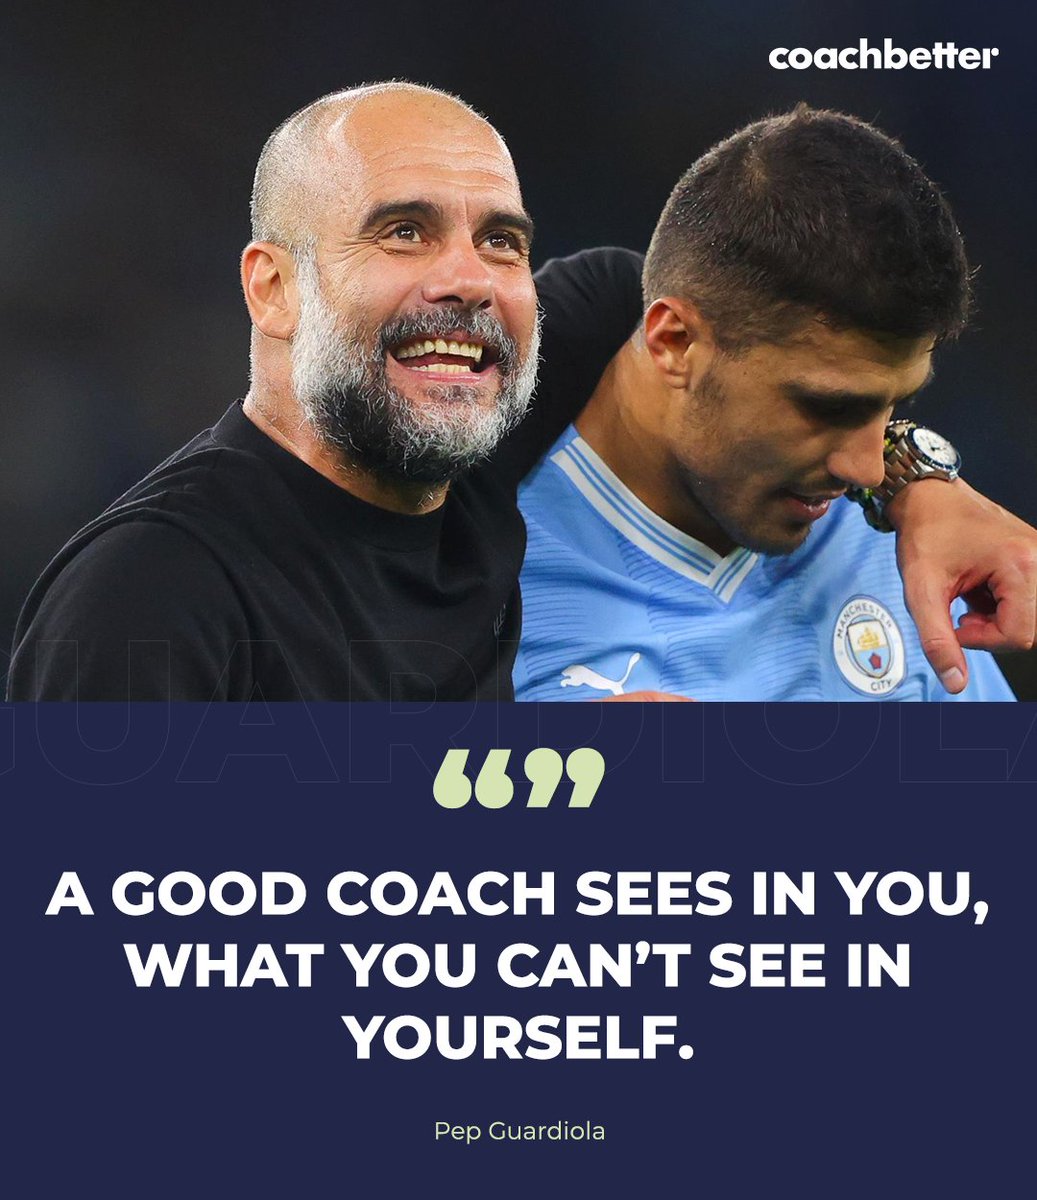 🗣️ “A good coach sees in you, what you can’t see in yourself.” - Pep Guardiola. Do you agree? 🤔 #pepguardiola